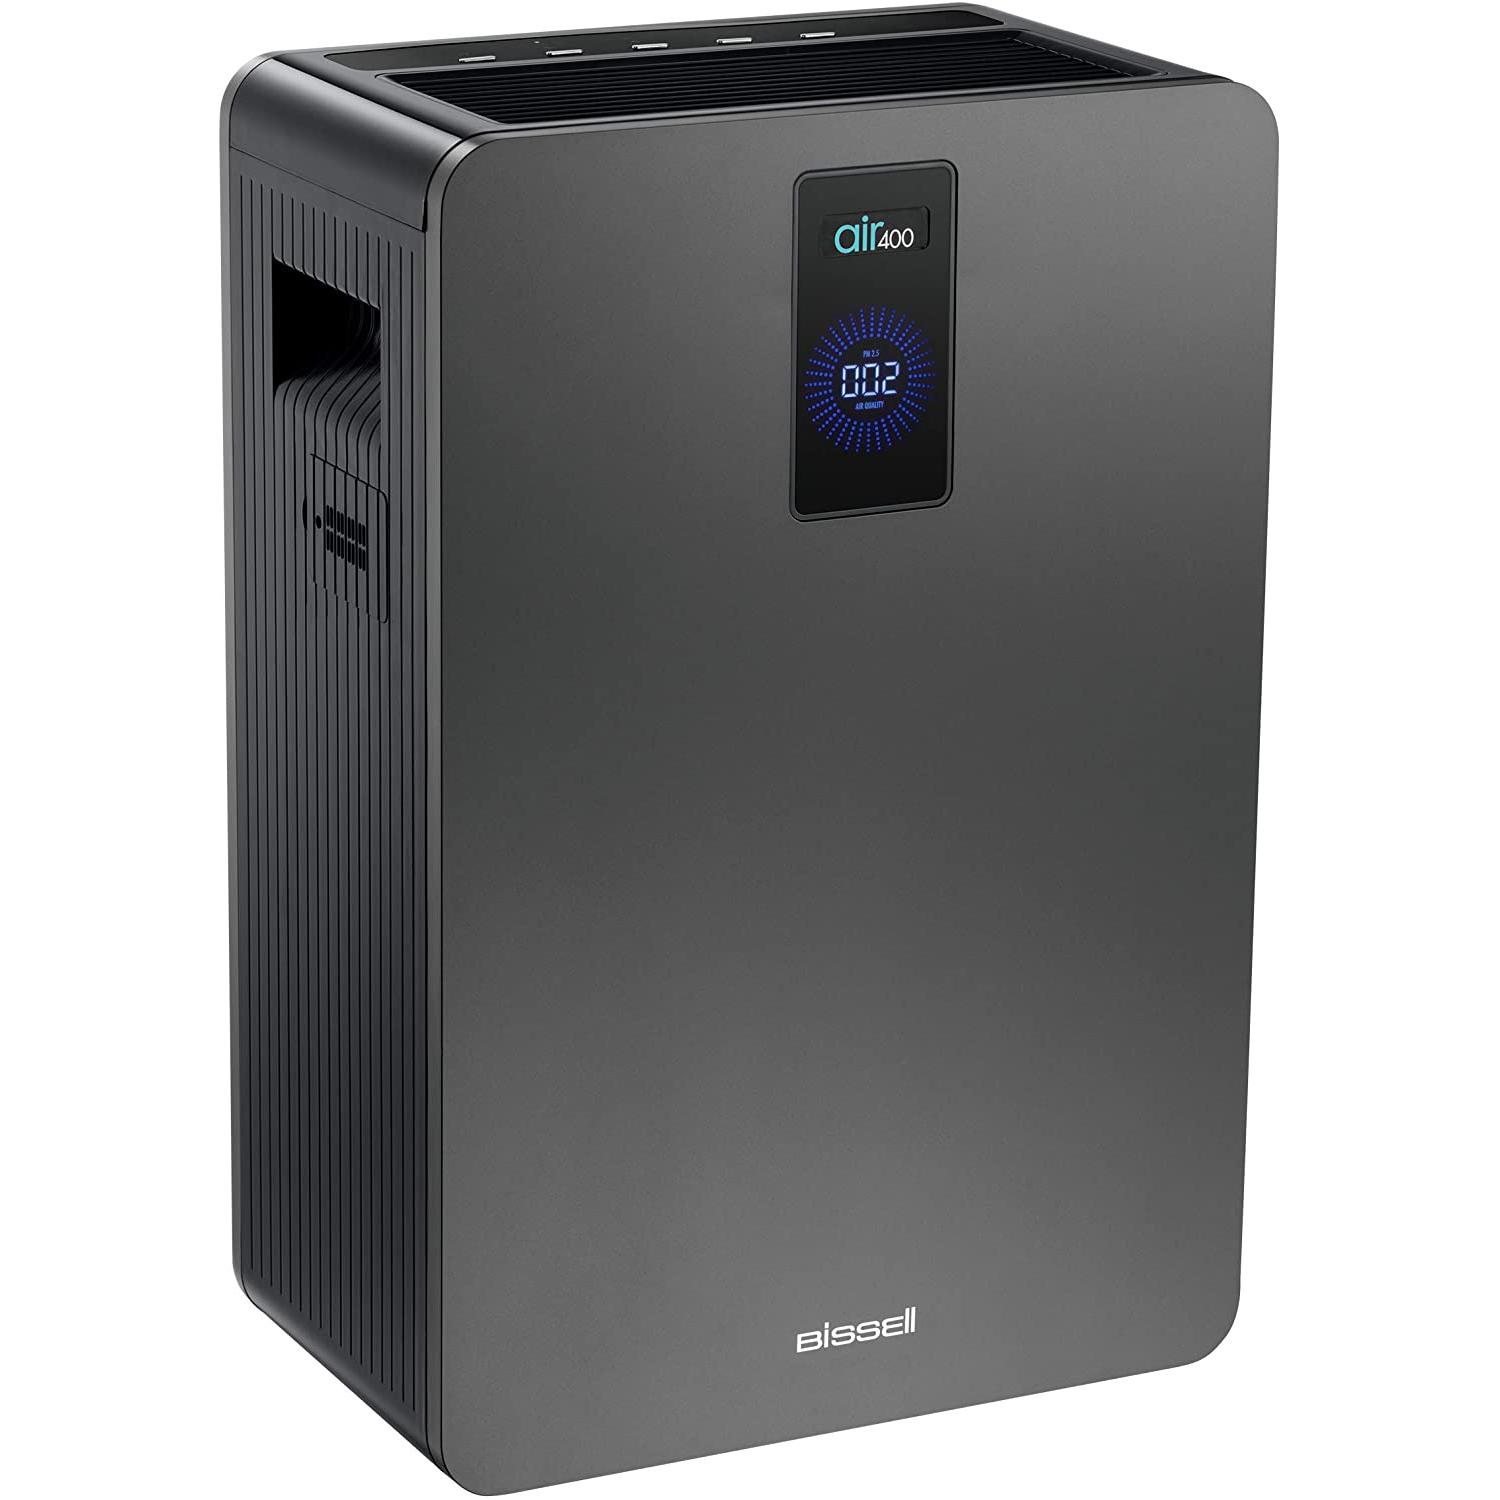 Bissell air400 Professional Air Purifier for $199.99 Shipped